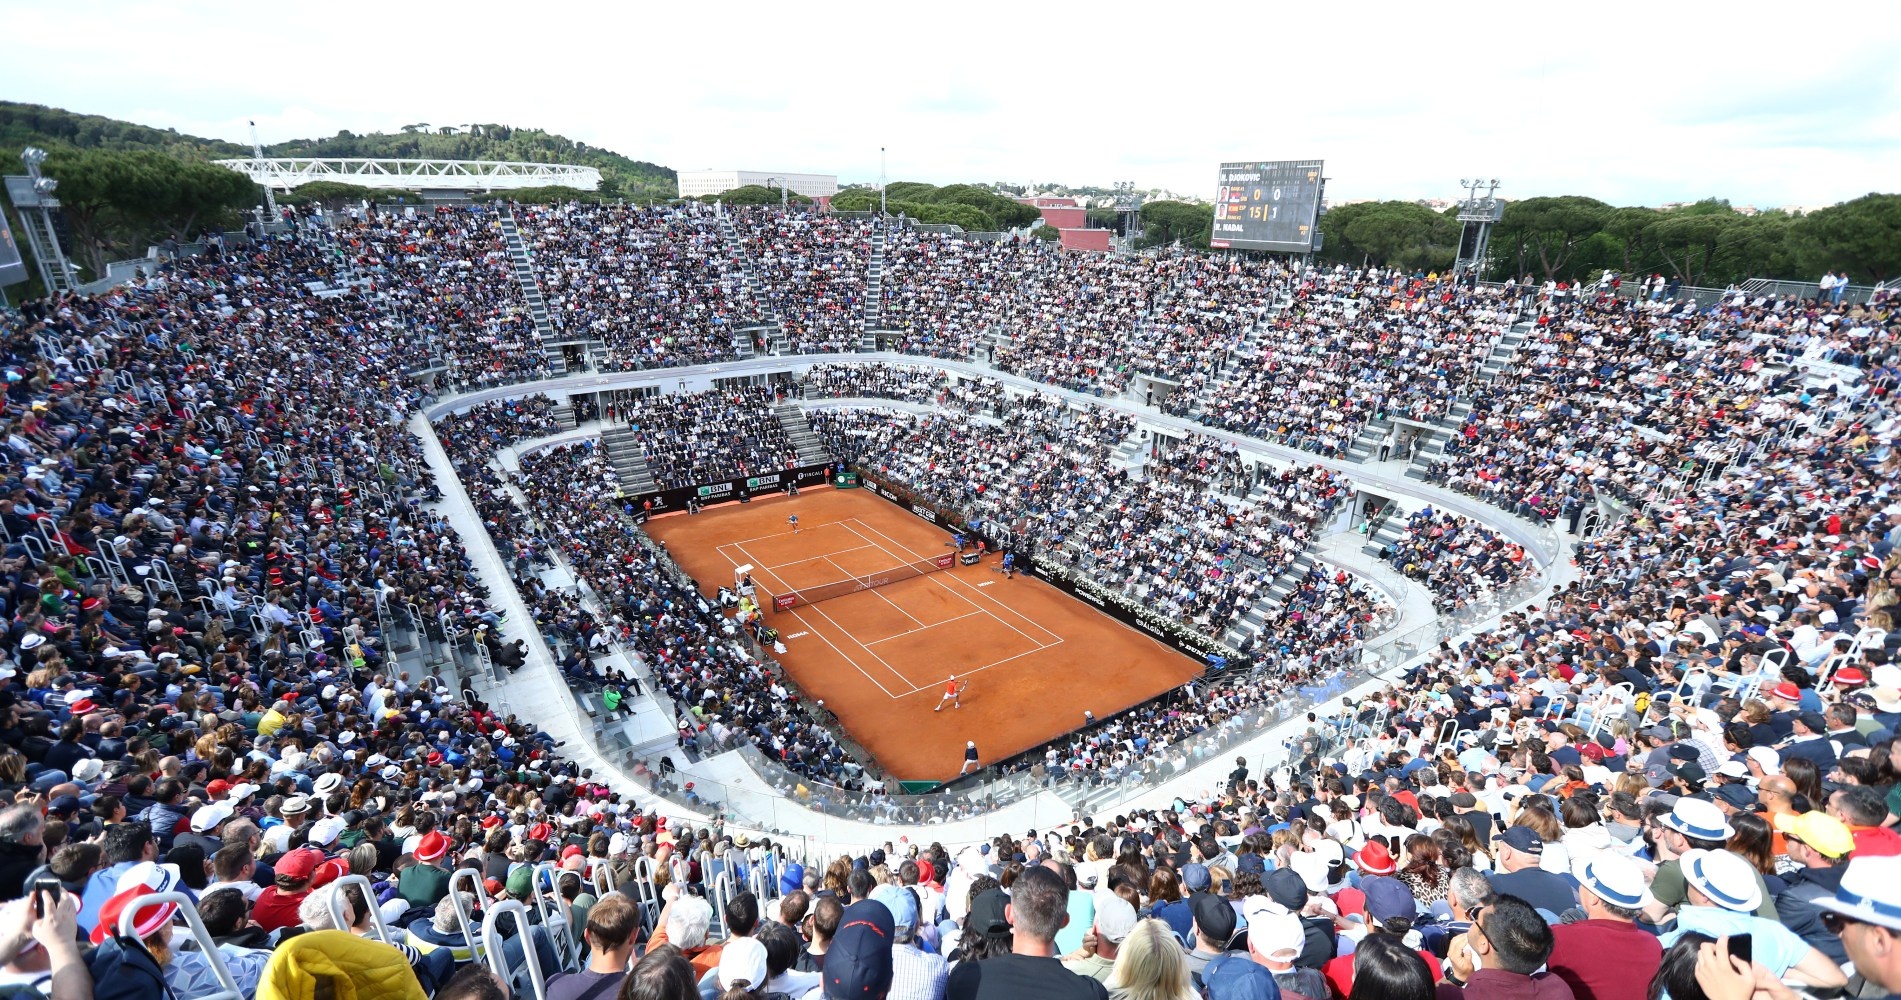 Rome central court can host 12,500 fans.